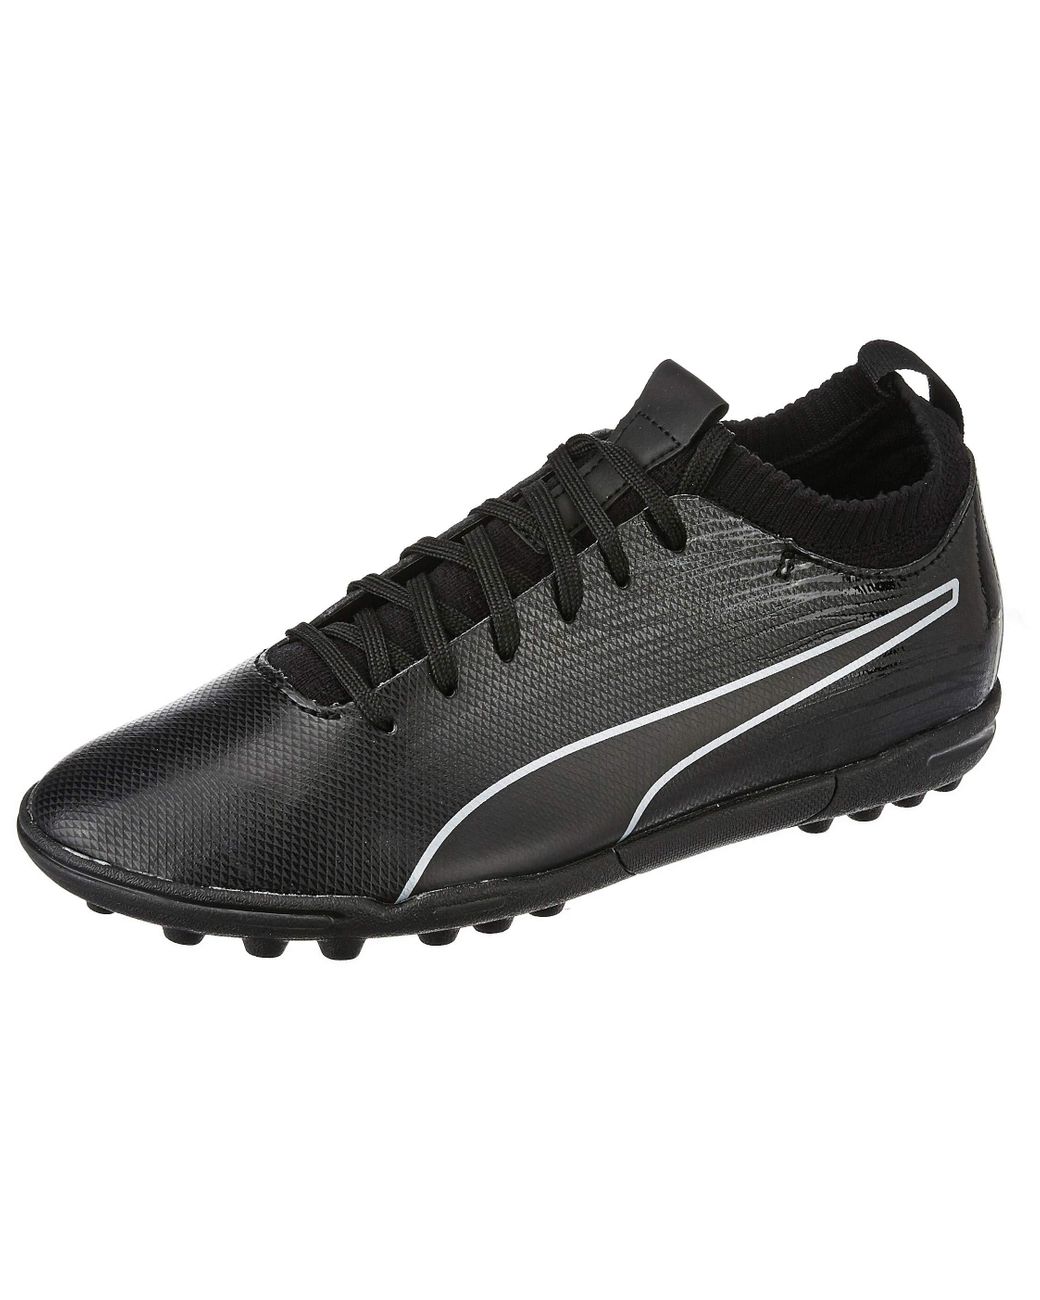 PUMA Rubber Evoknit Astro Turf Trainers in Black for Men - Save 58% - Lyst